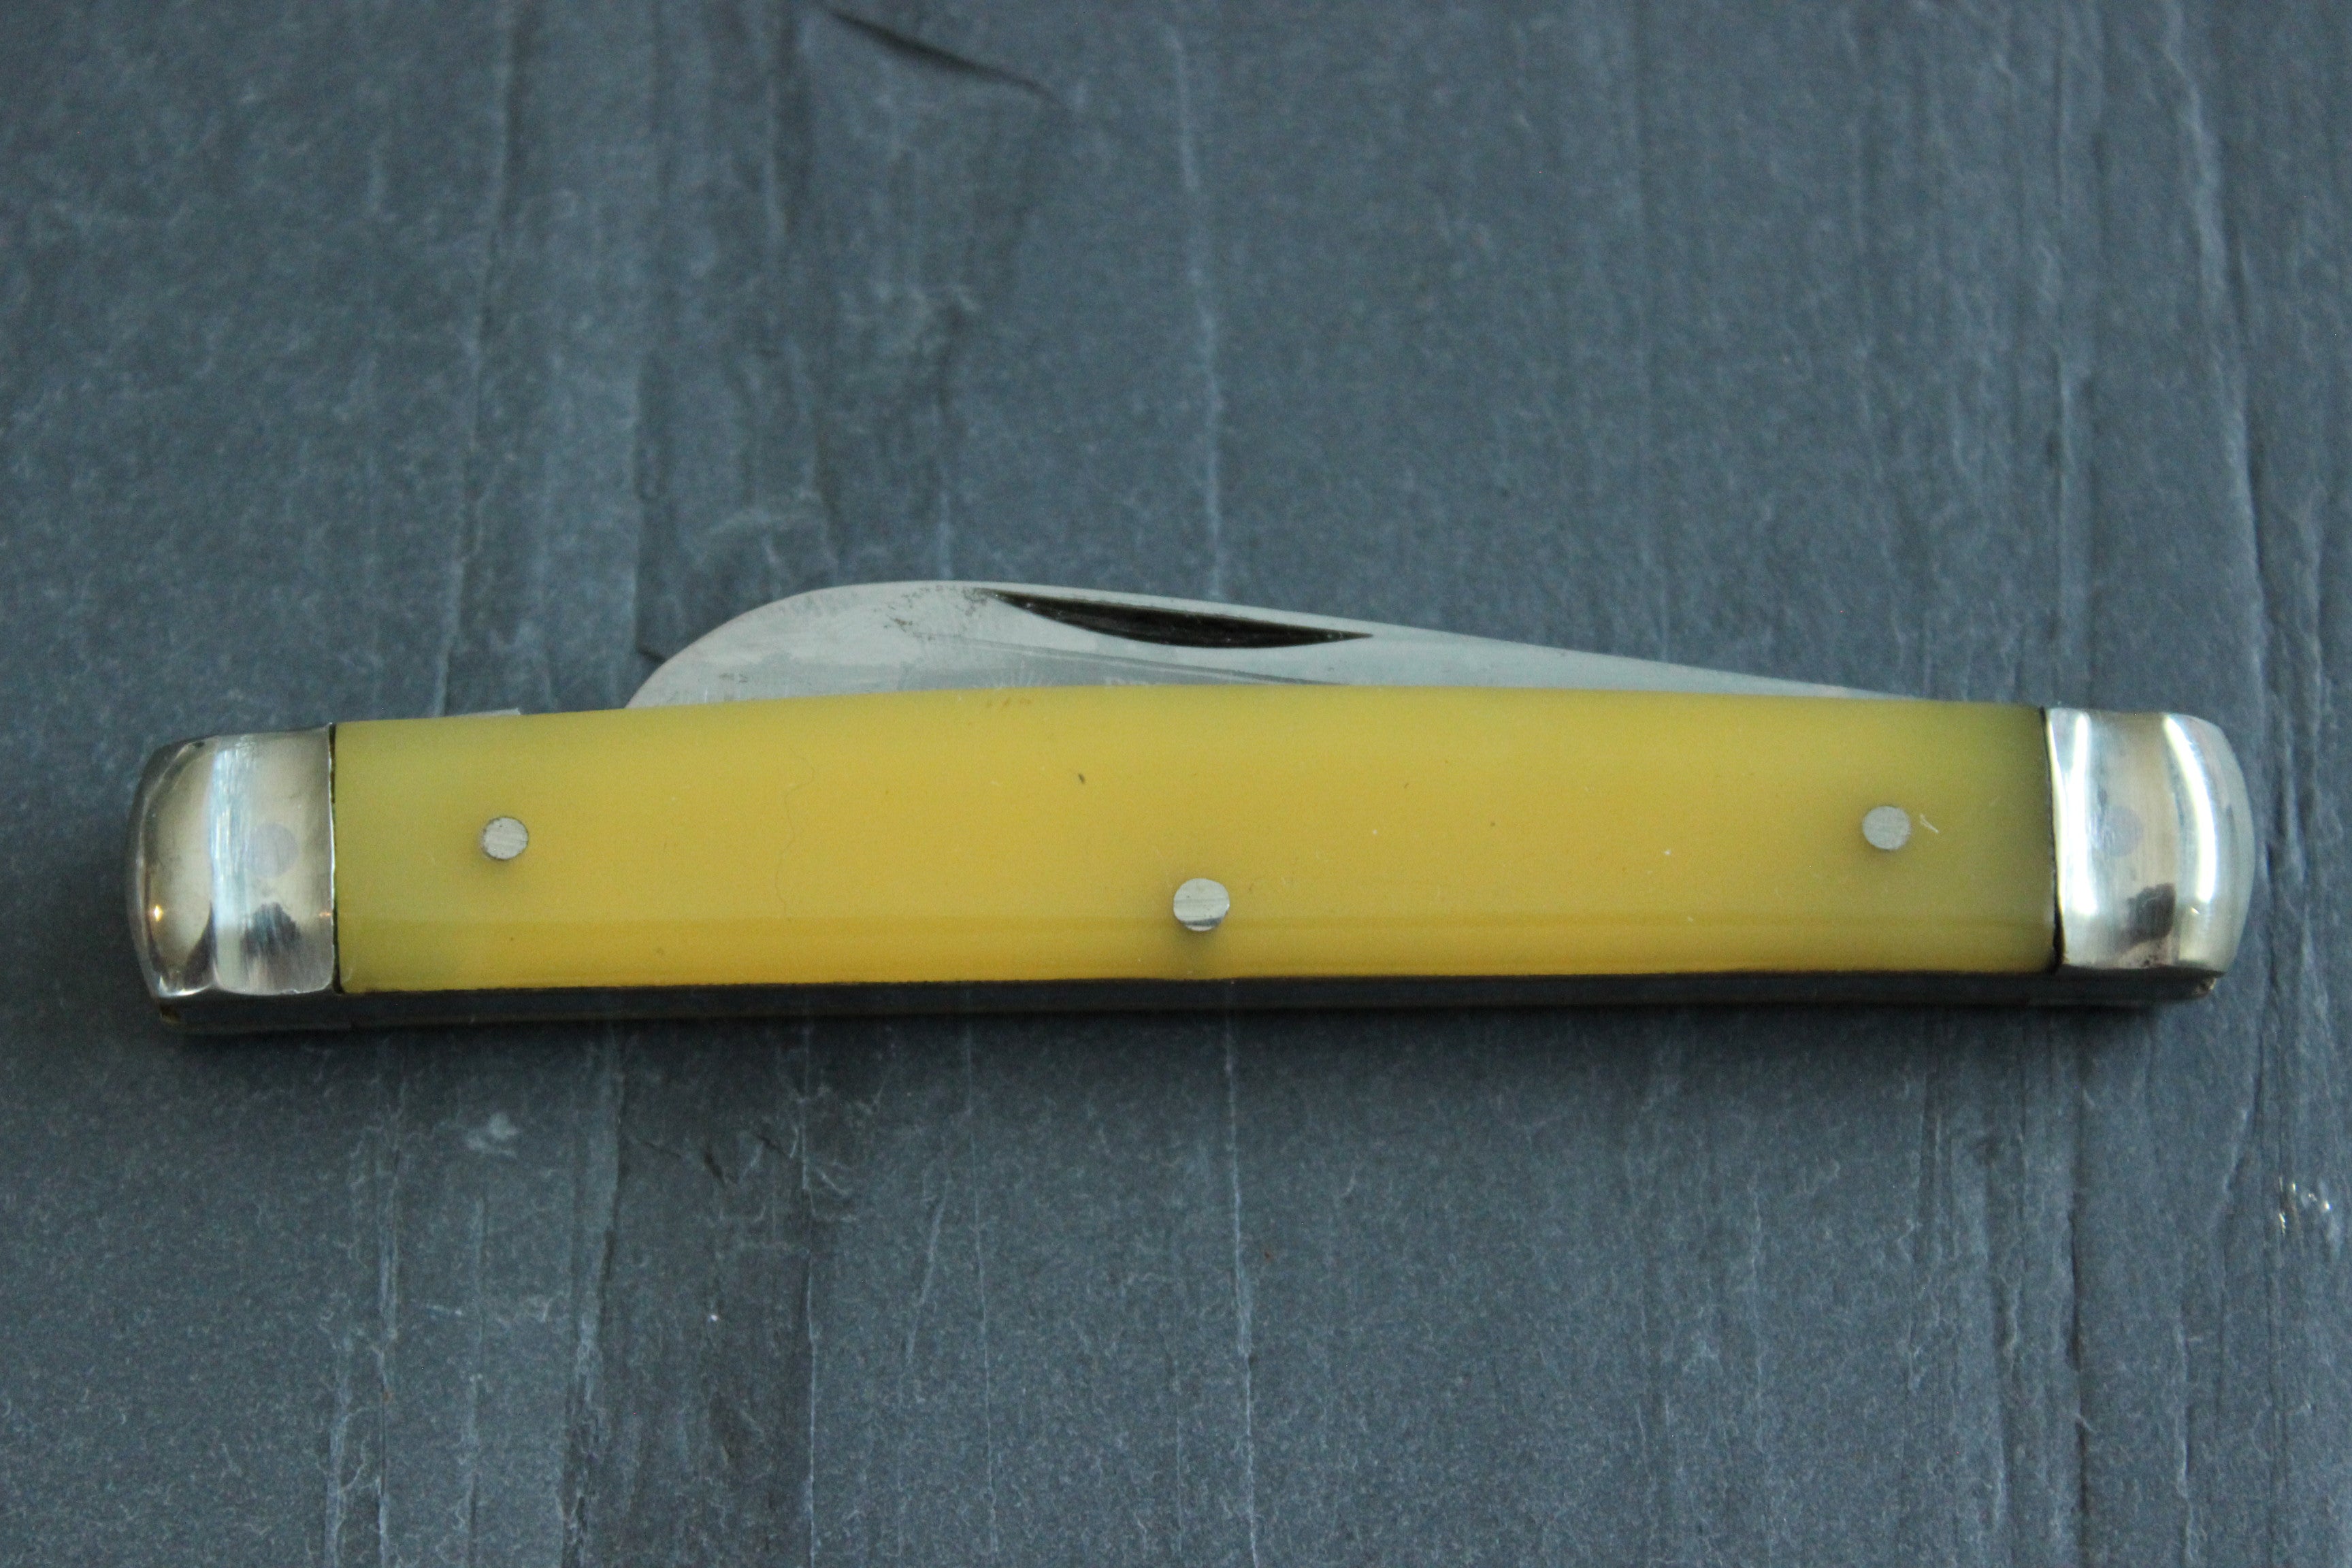 German Eye Brand Two-Blade Congress 3.38 Closed, Yellow Celluloid Handles  - KnifeCenter - GE54Y - Discontinued